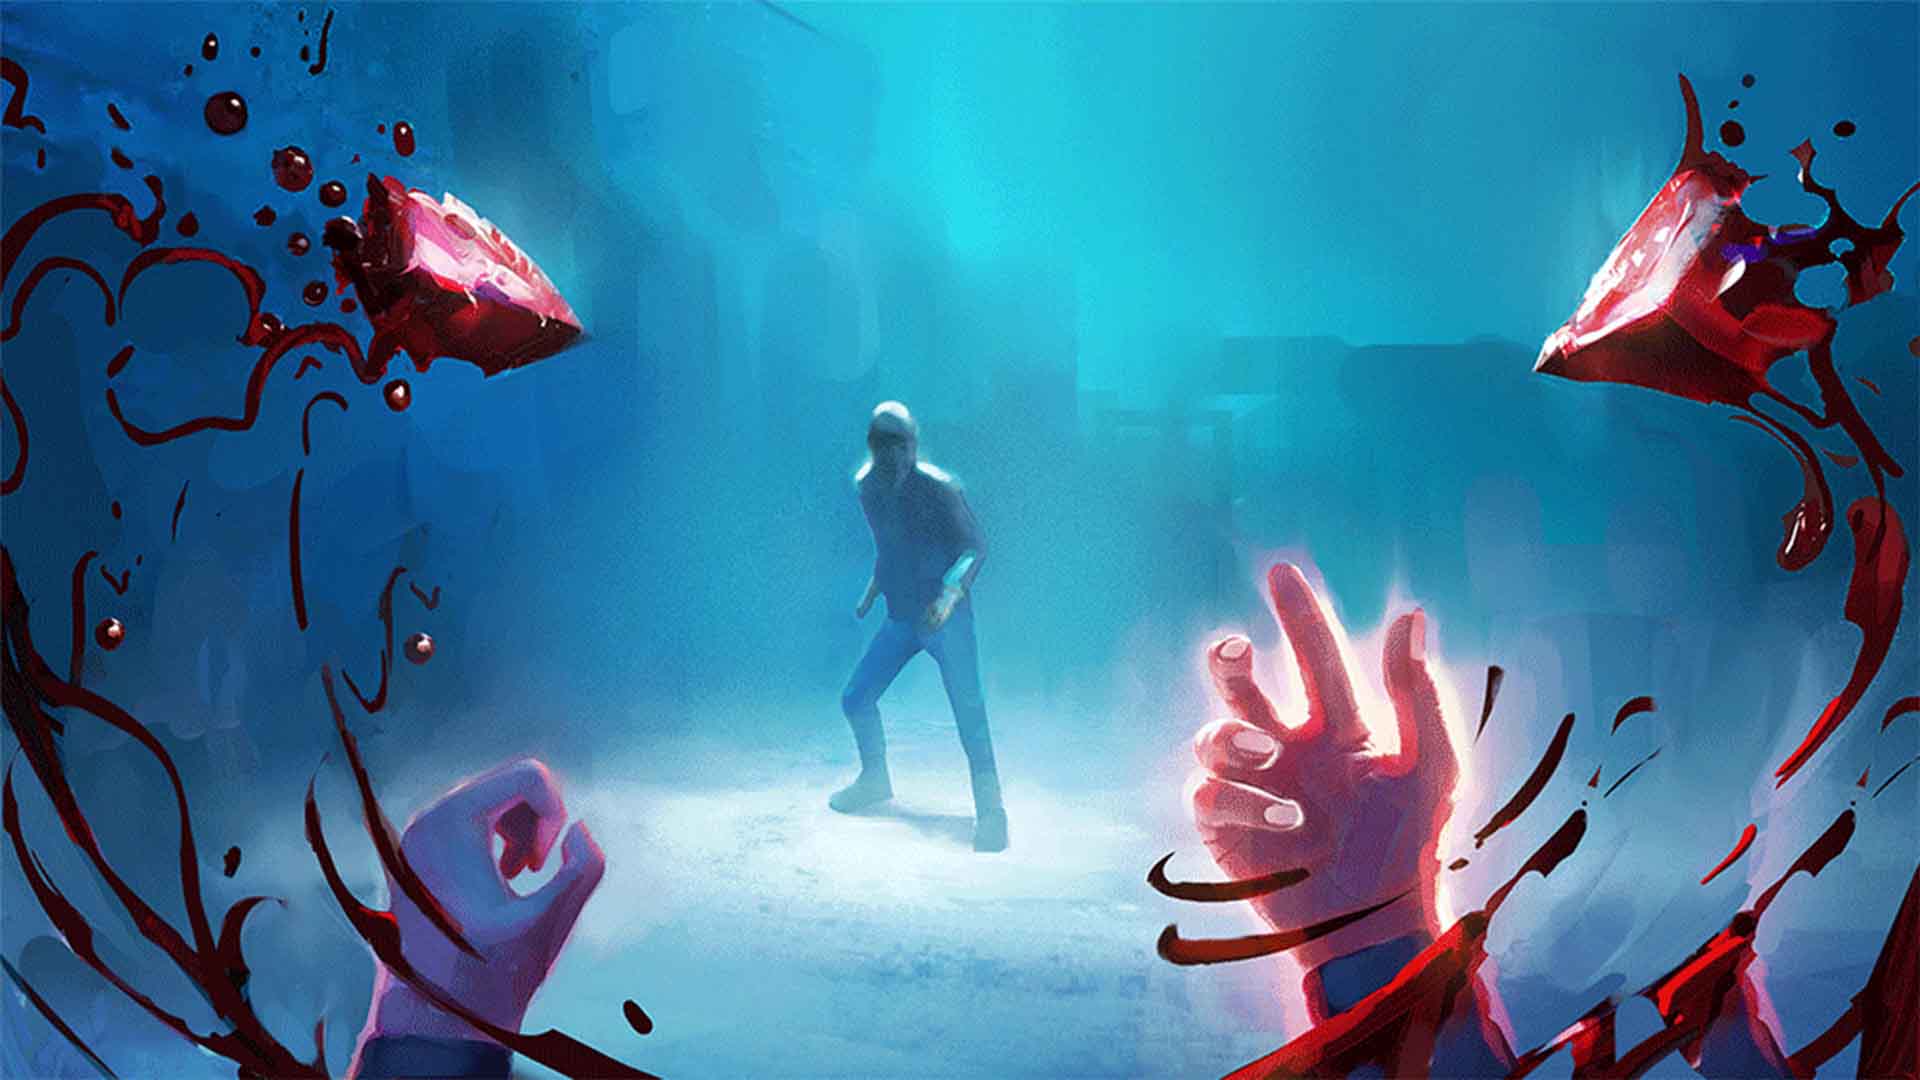 Vampire The Masquerade Justice VR Review on Quest 3 and PSVR 2